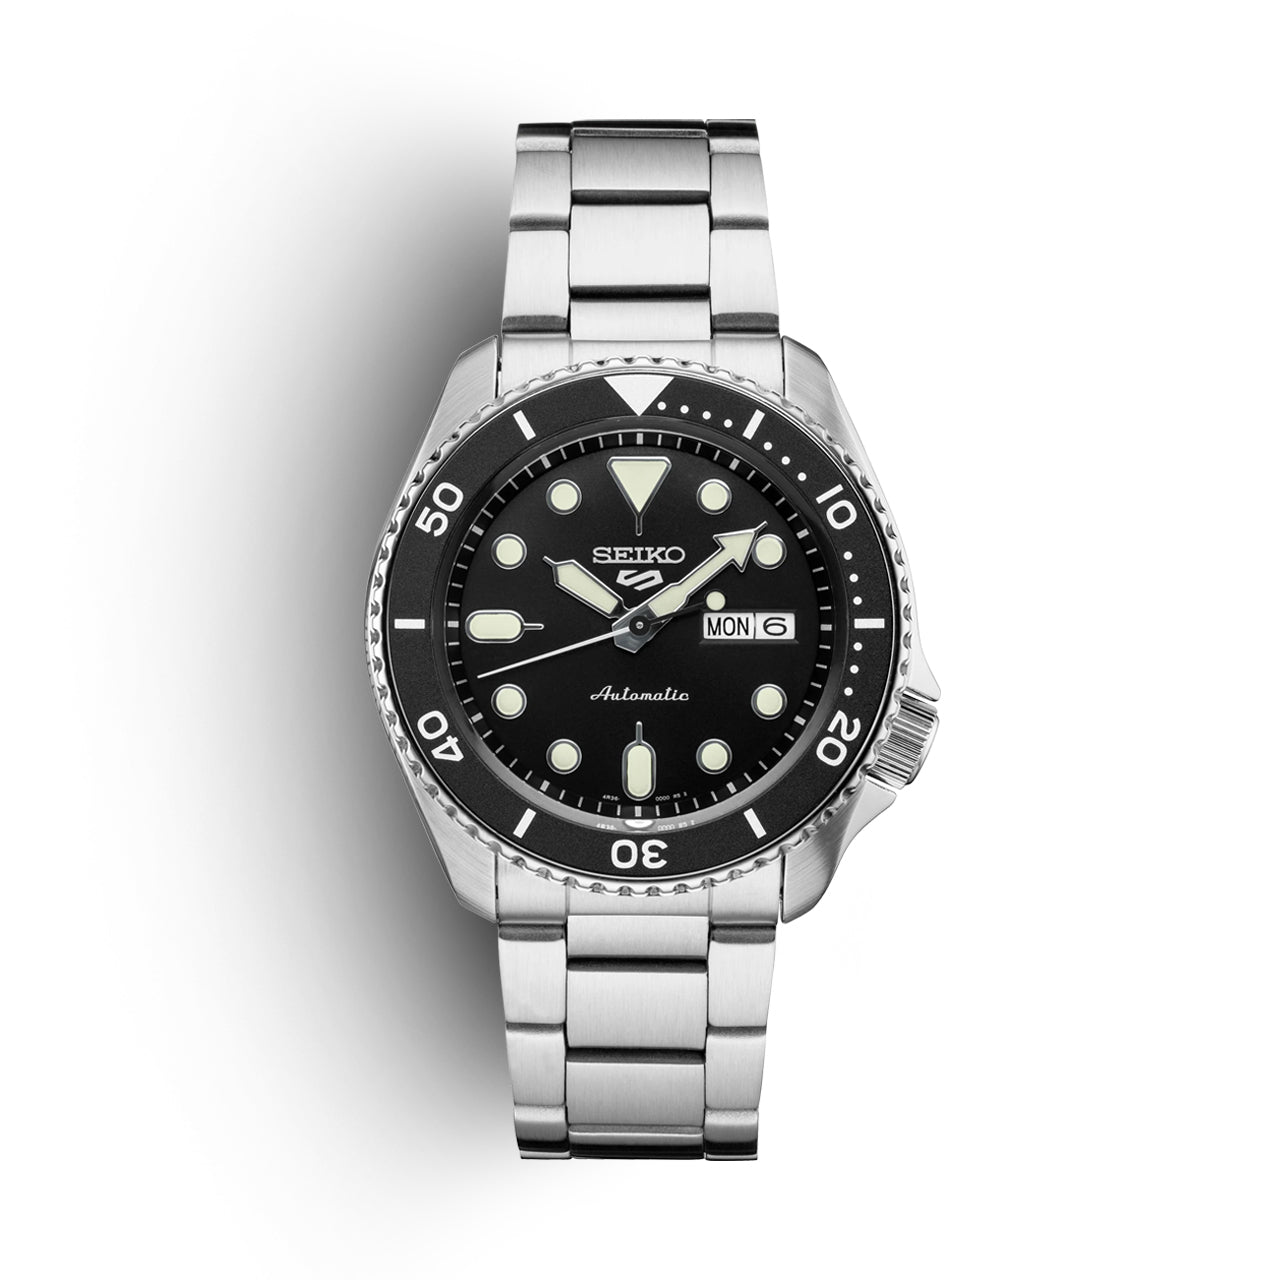 Seiko 5 Sports SRPD55 | Uncrate